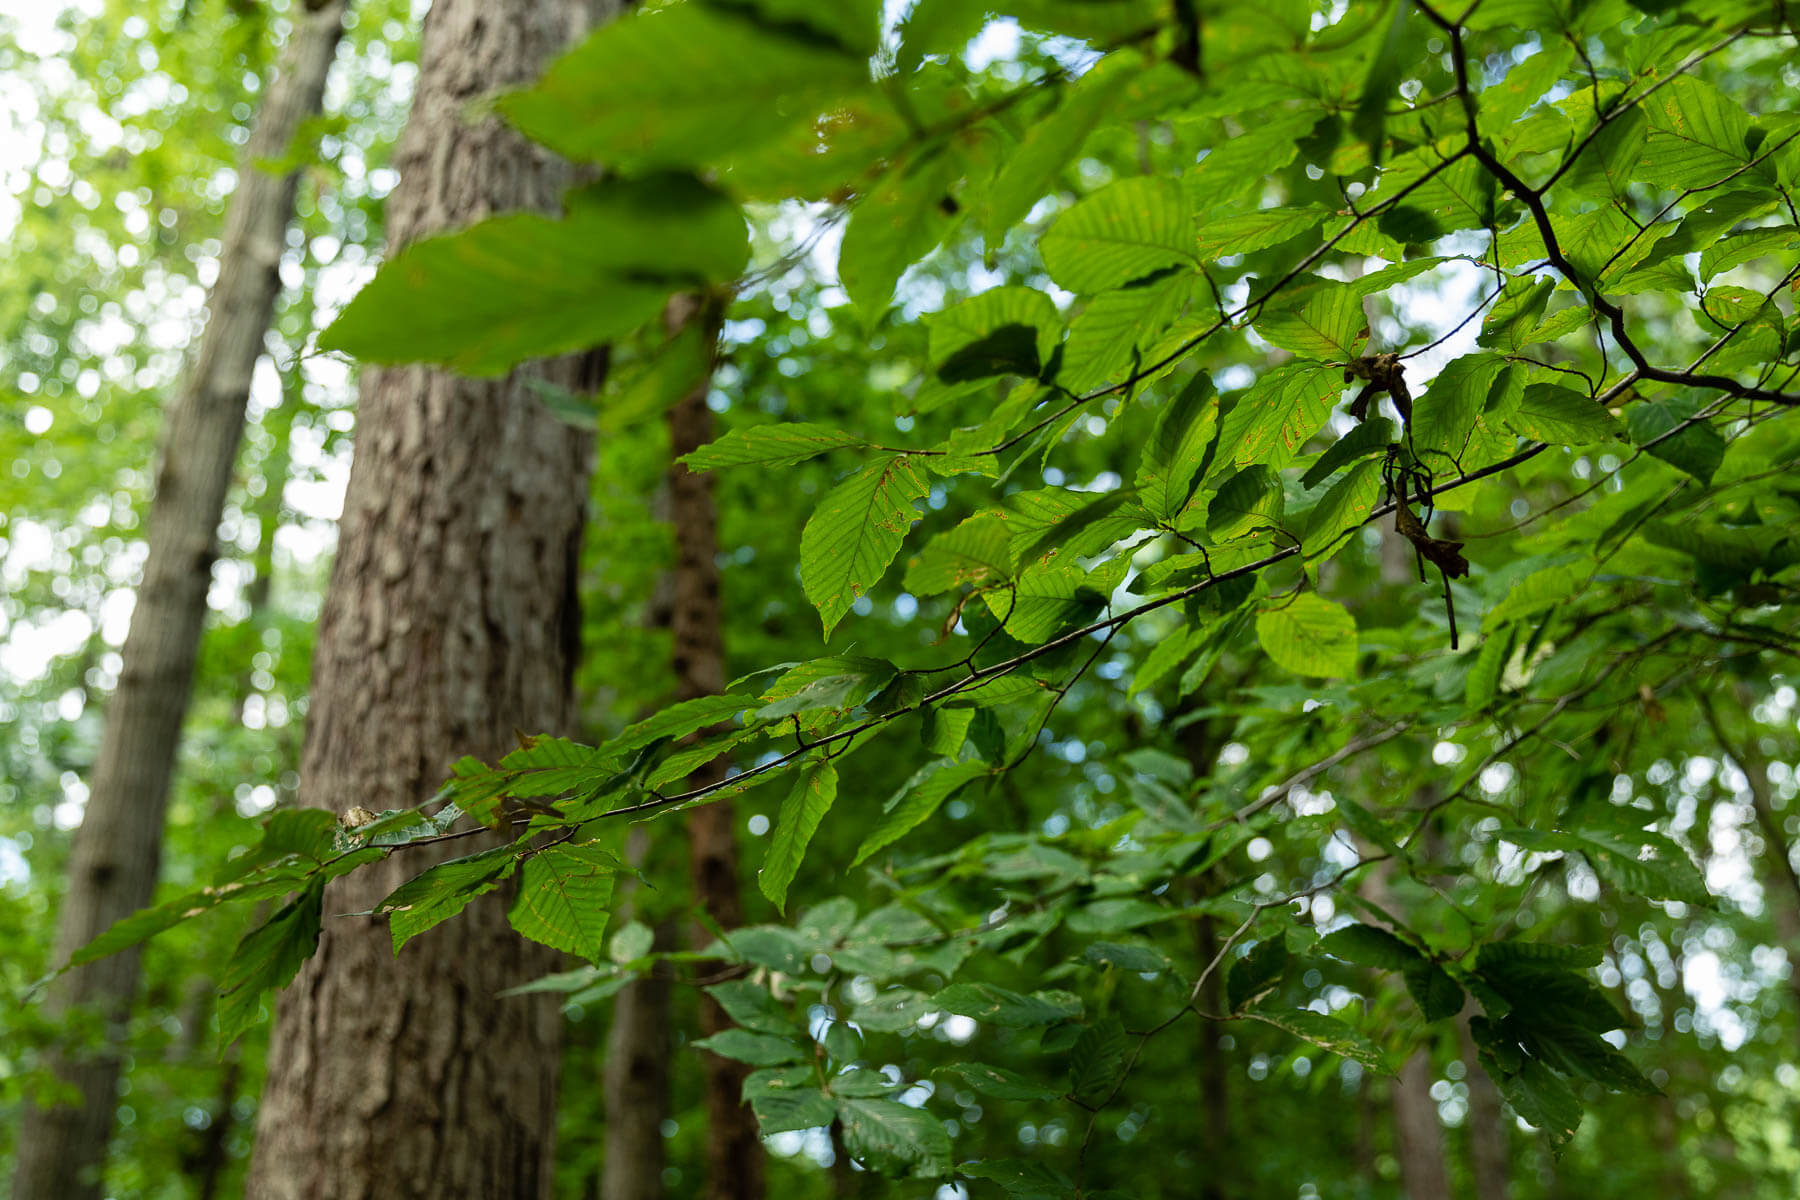 Photo of leaves in a forest.